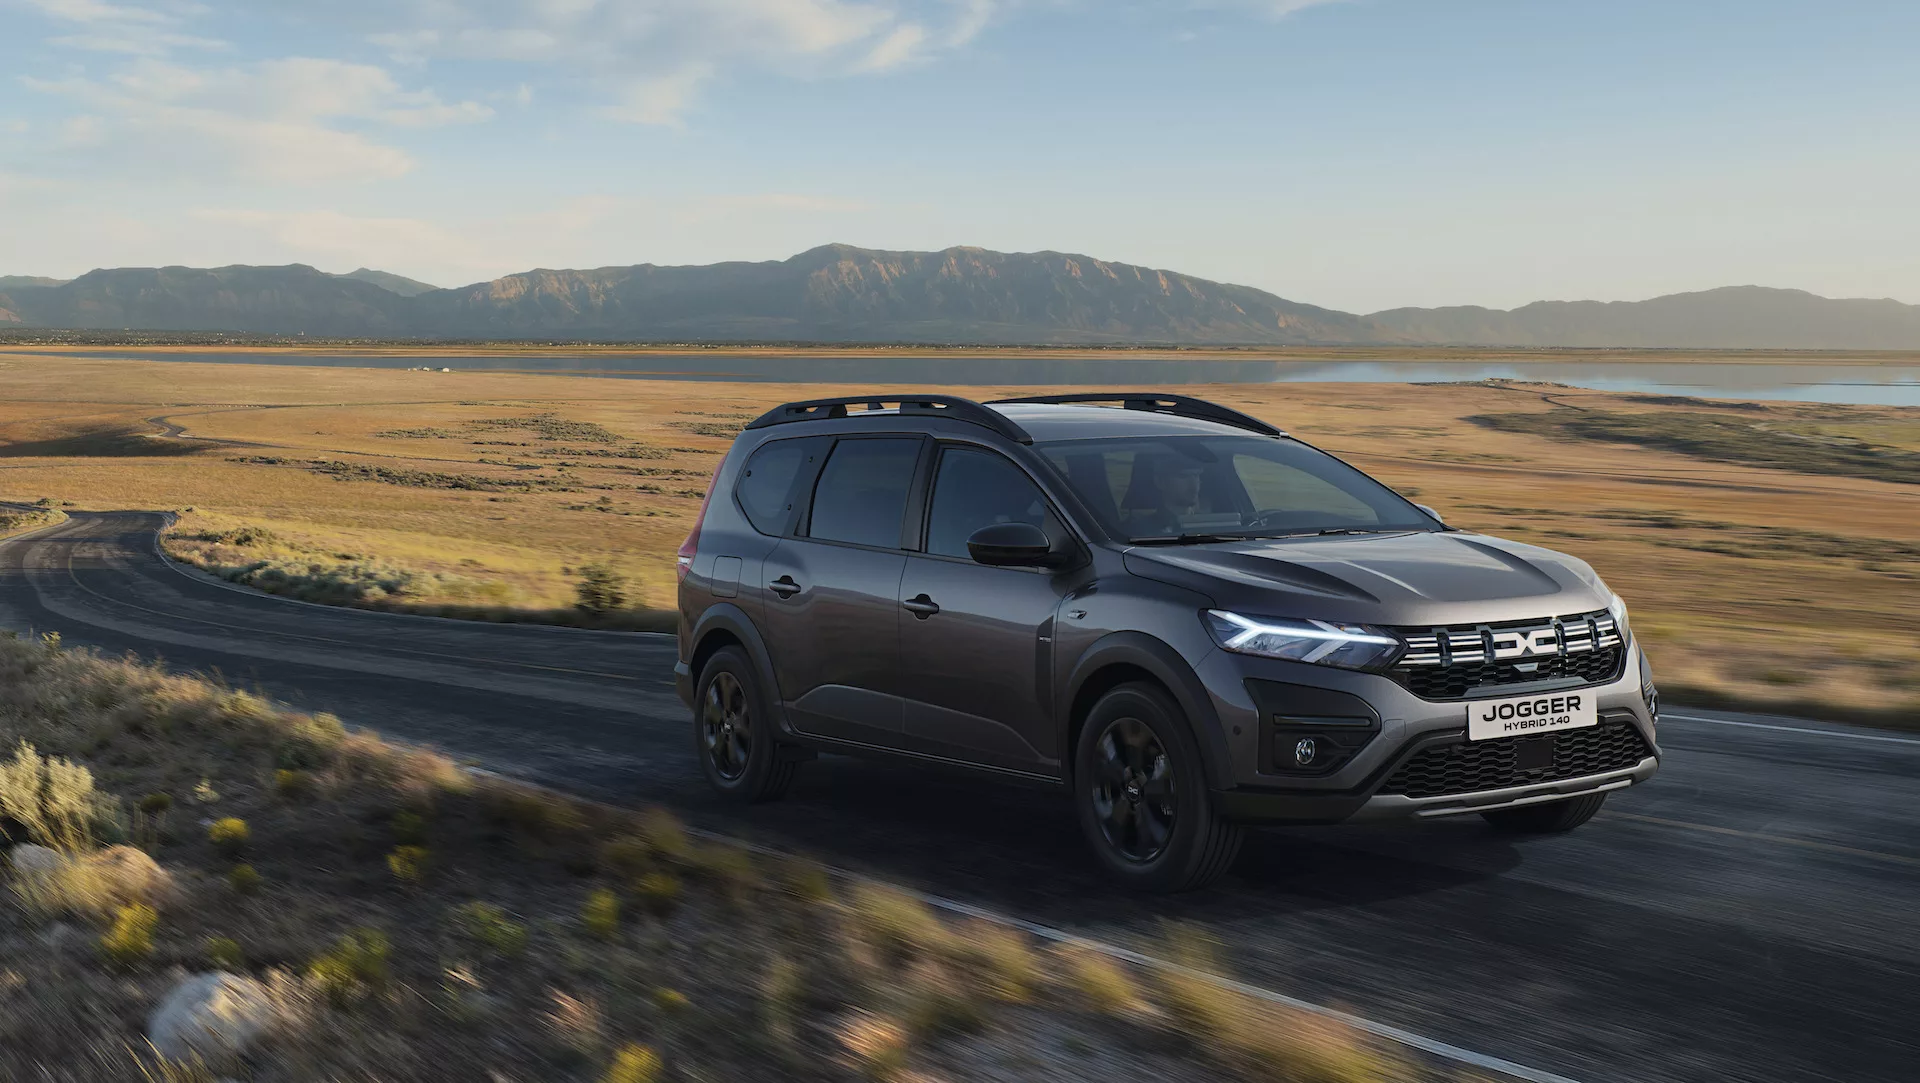 Dacia electrifies seven-seat Jogger creating its first ever Hybrid